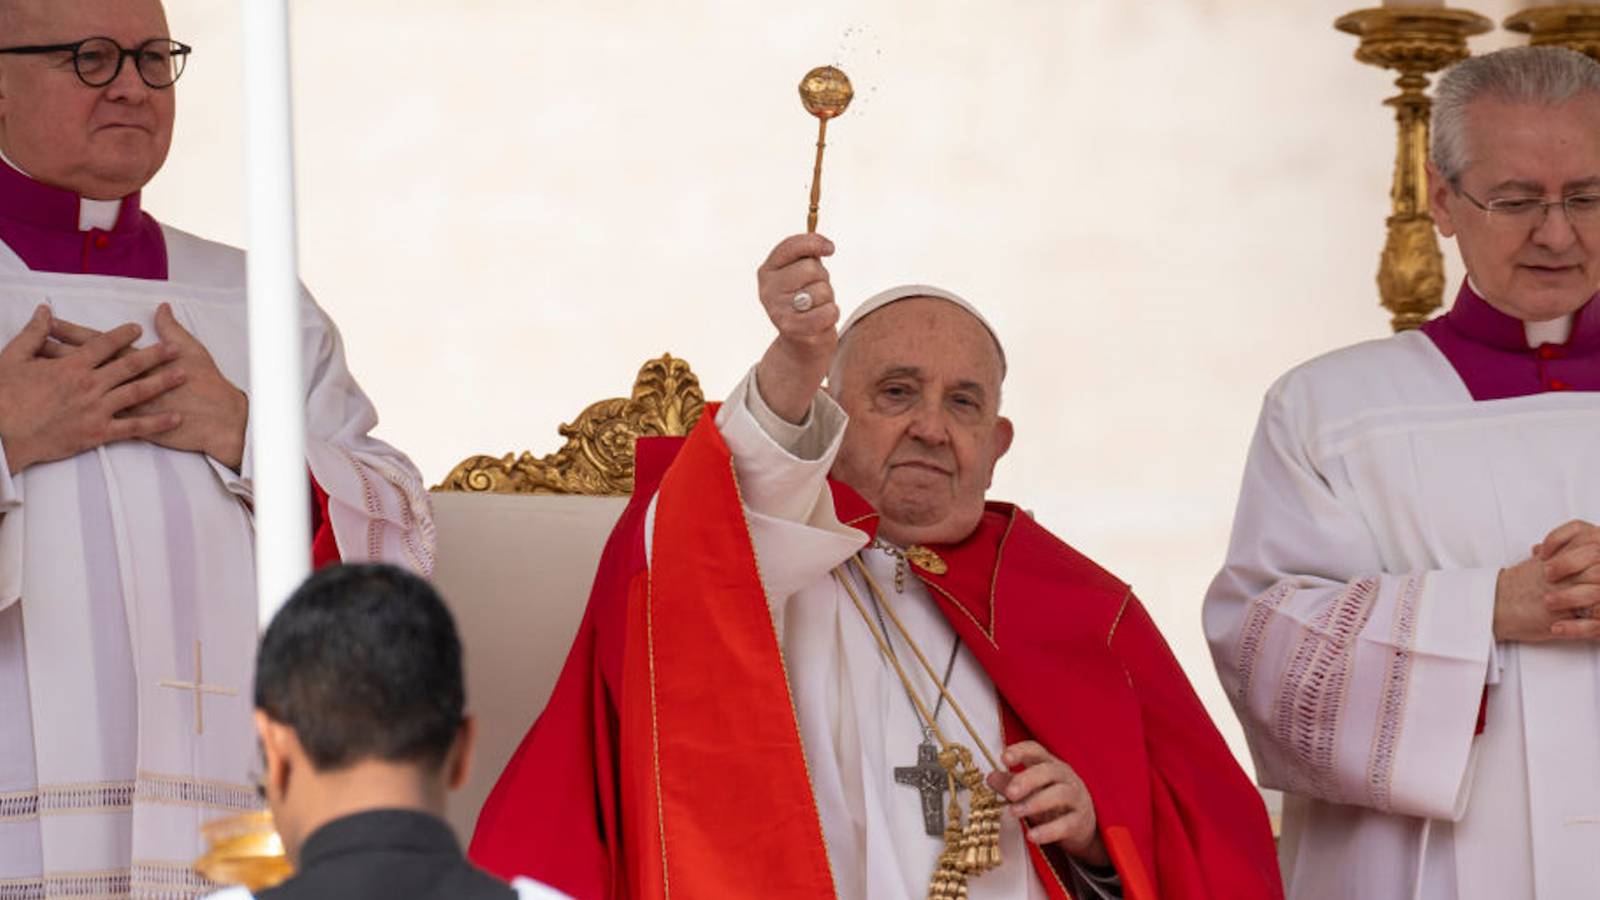 Pope Francis skips Palm Sunday homily, raising questions about his